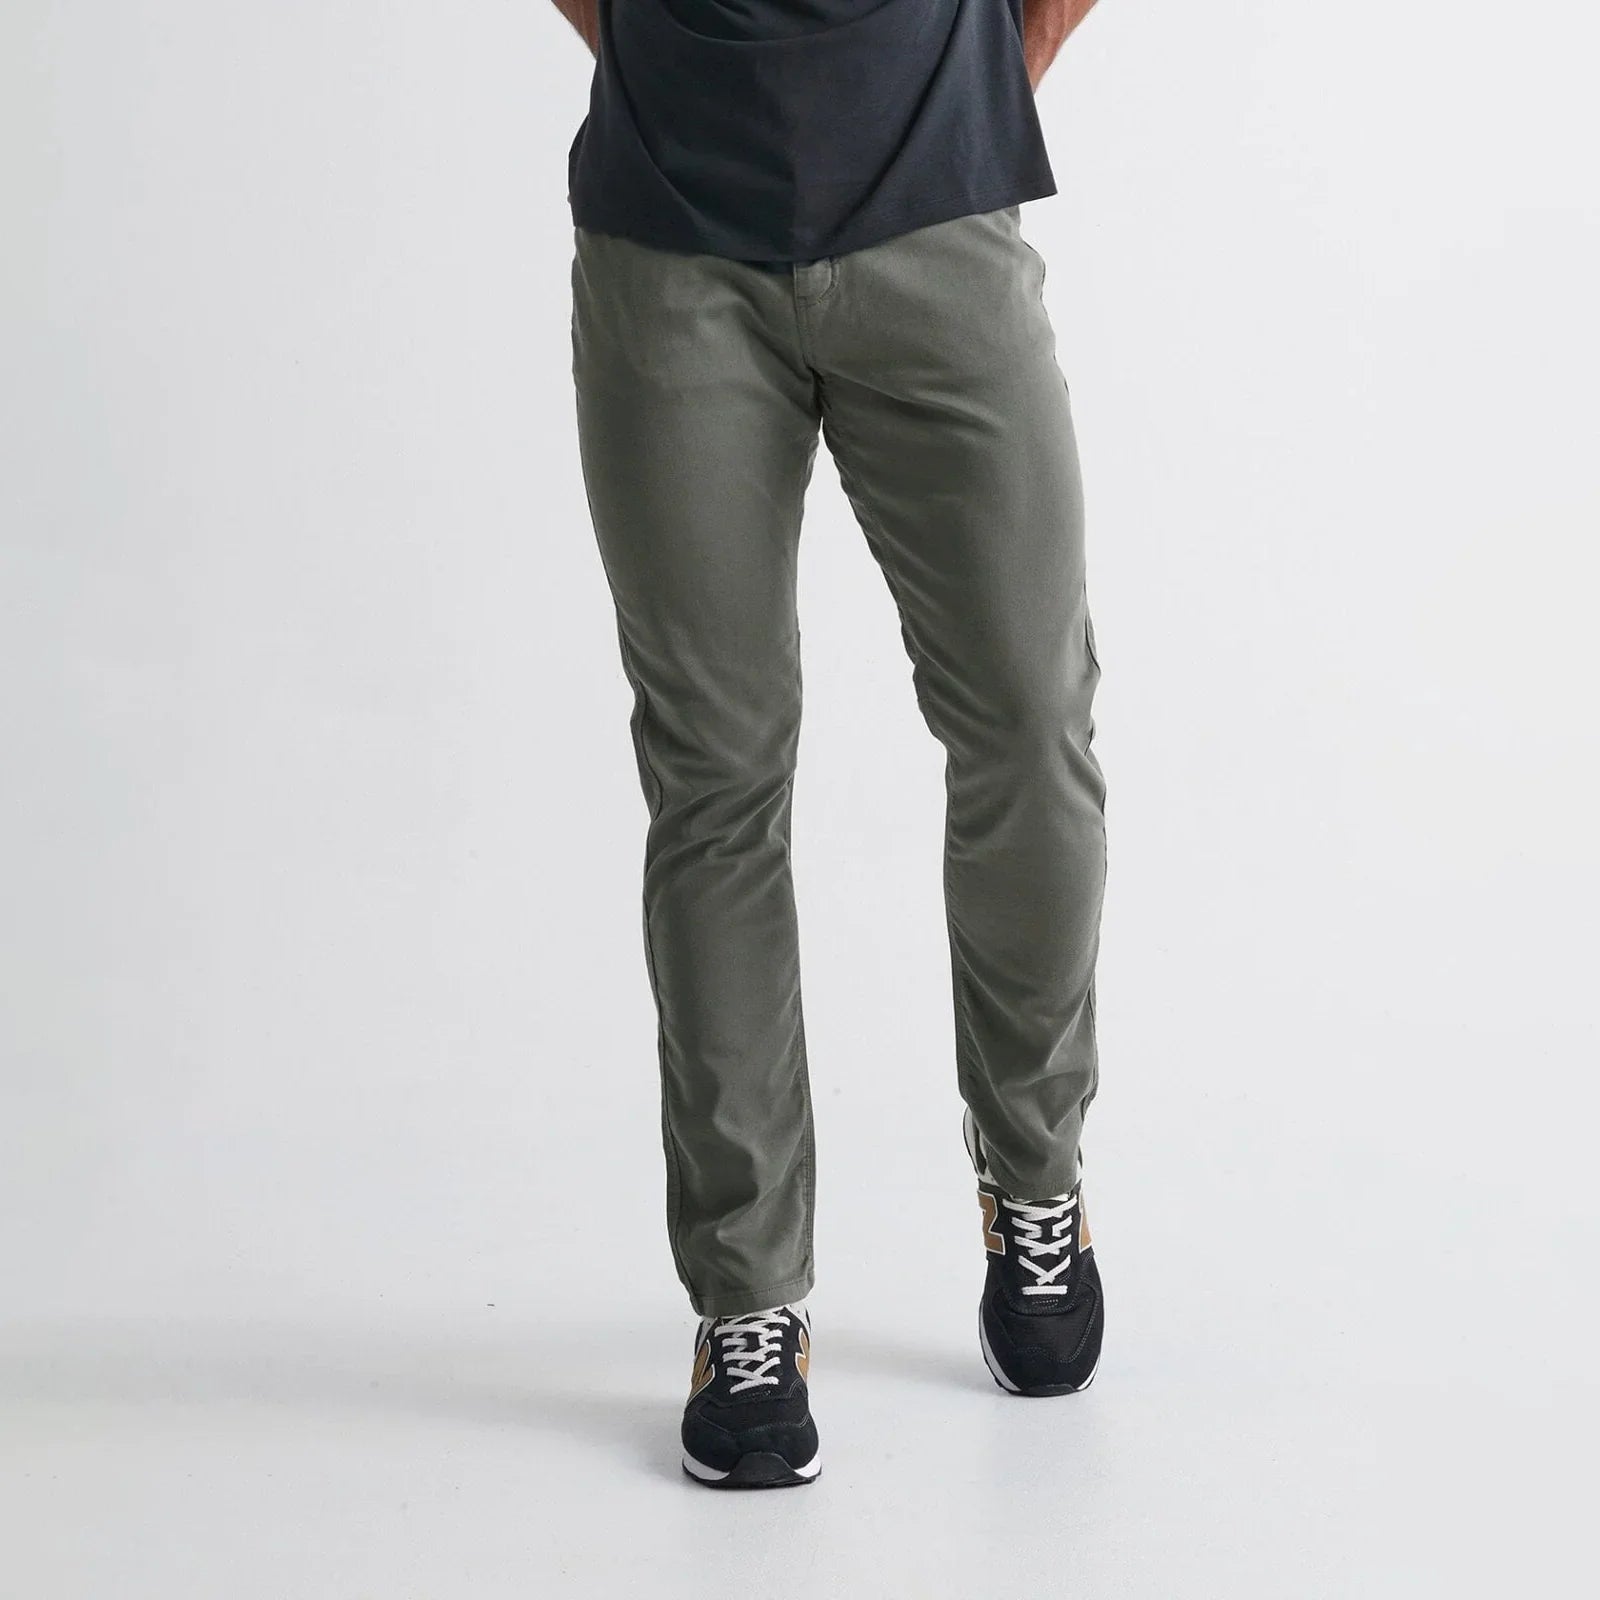 'Du/er No Sweat Pant Relaxed Taper - Gull' in 'Gull' colour